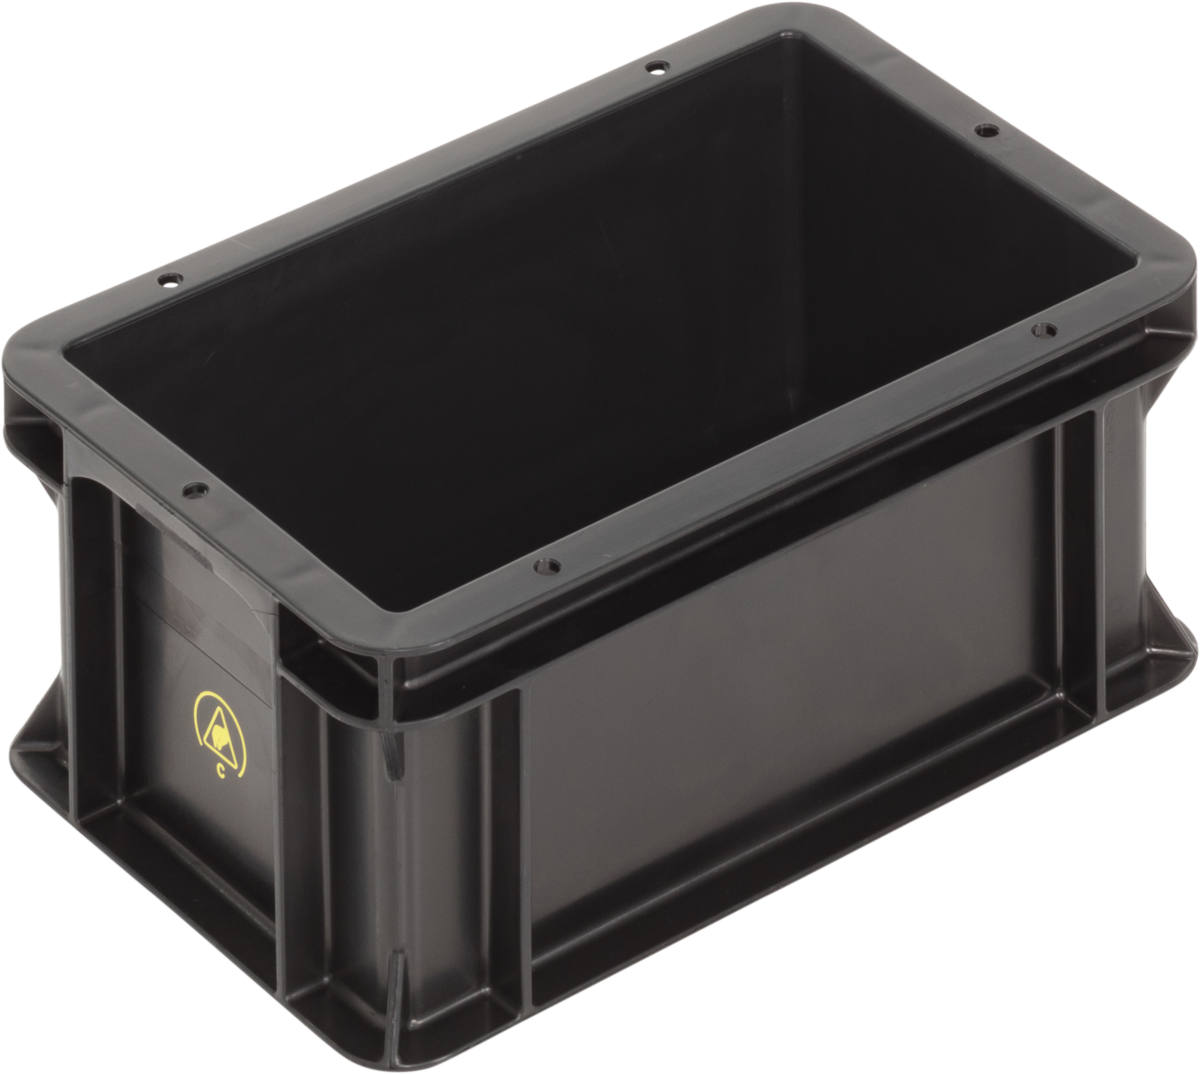 Anti-Static-ESD-Antistatic-Safe-SGL-Norm-Stacking-Bin-Containers-Flat-Base-Ref.-3213.007.992_1004266_300x200x145_01